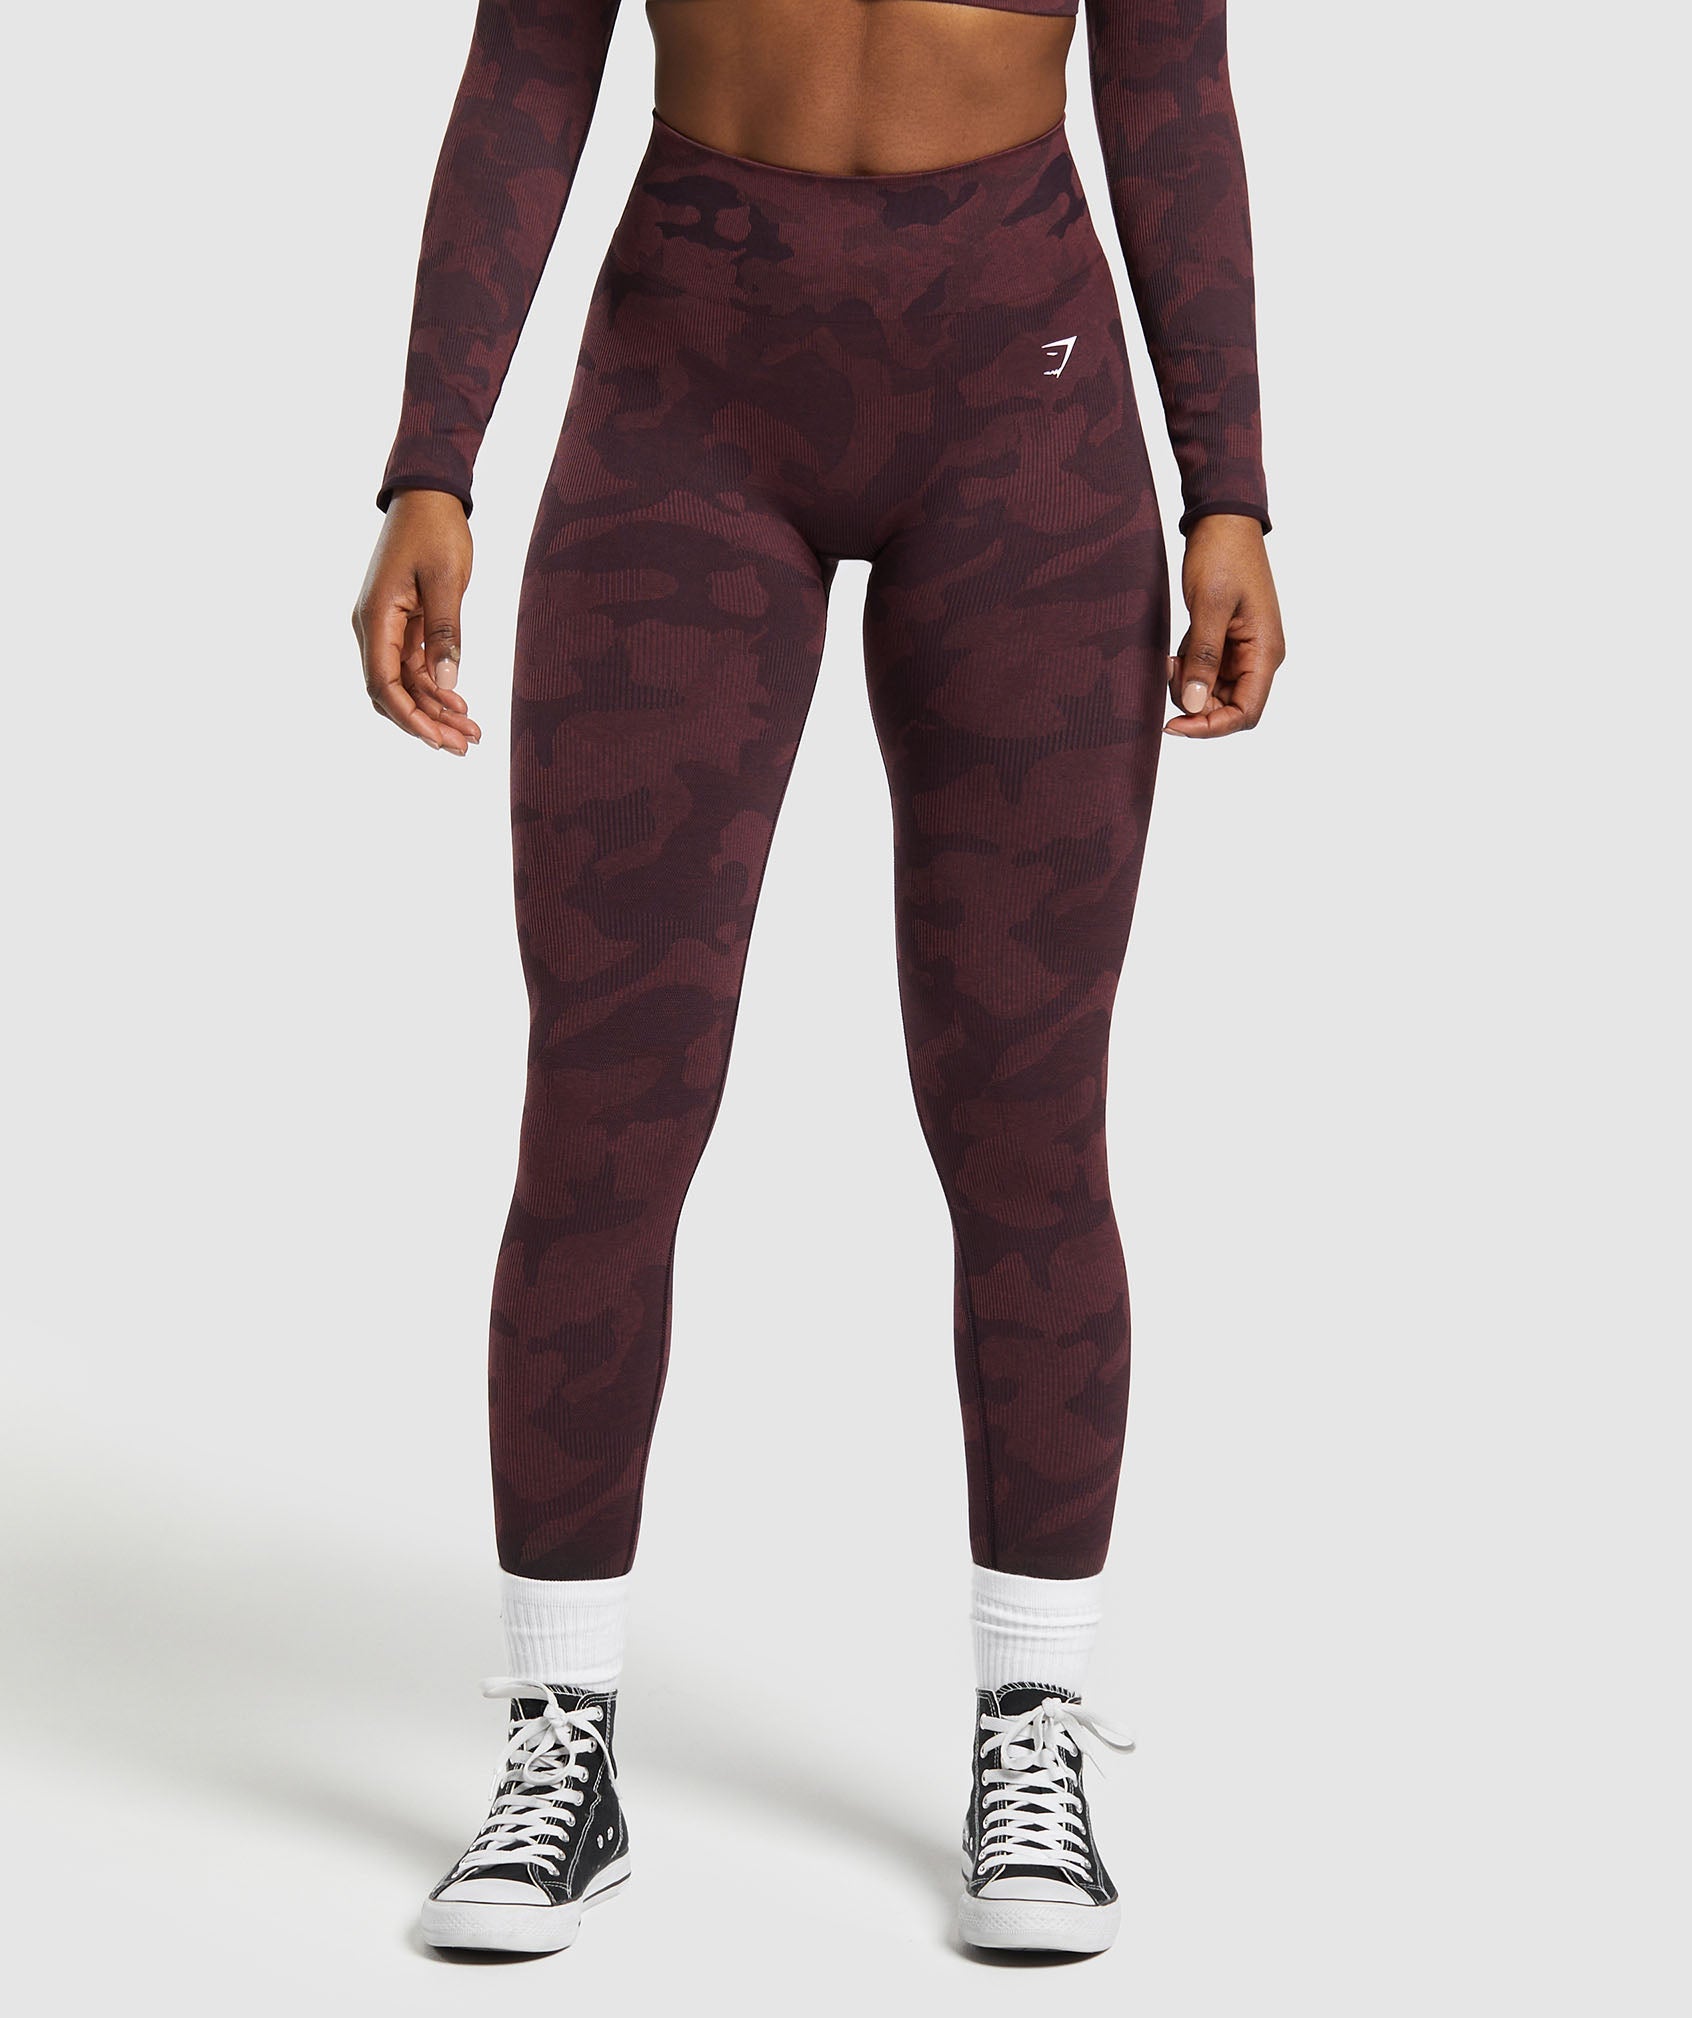 Adapt Camo Seamless Leggings in Plum Brown/Burgundy Brown is out of stock